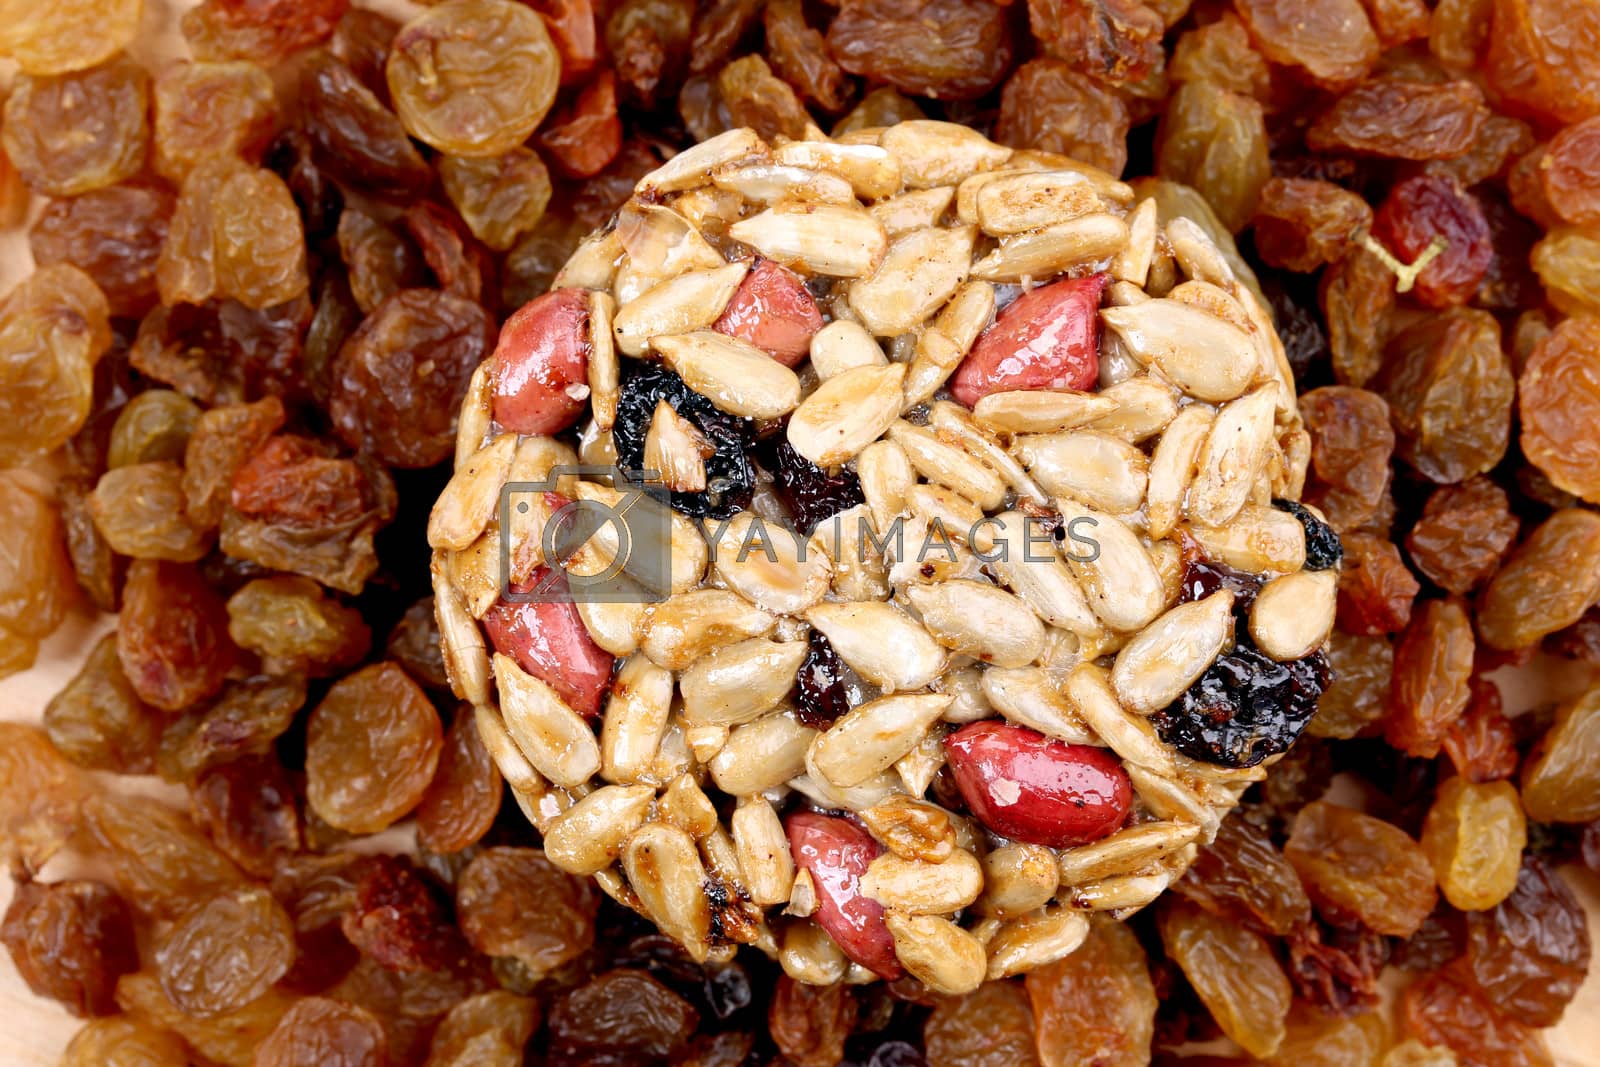 Royalty free image of Round candied seeds and nuts with raisins. by indigolotos